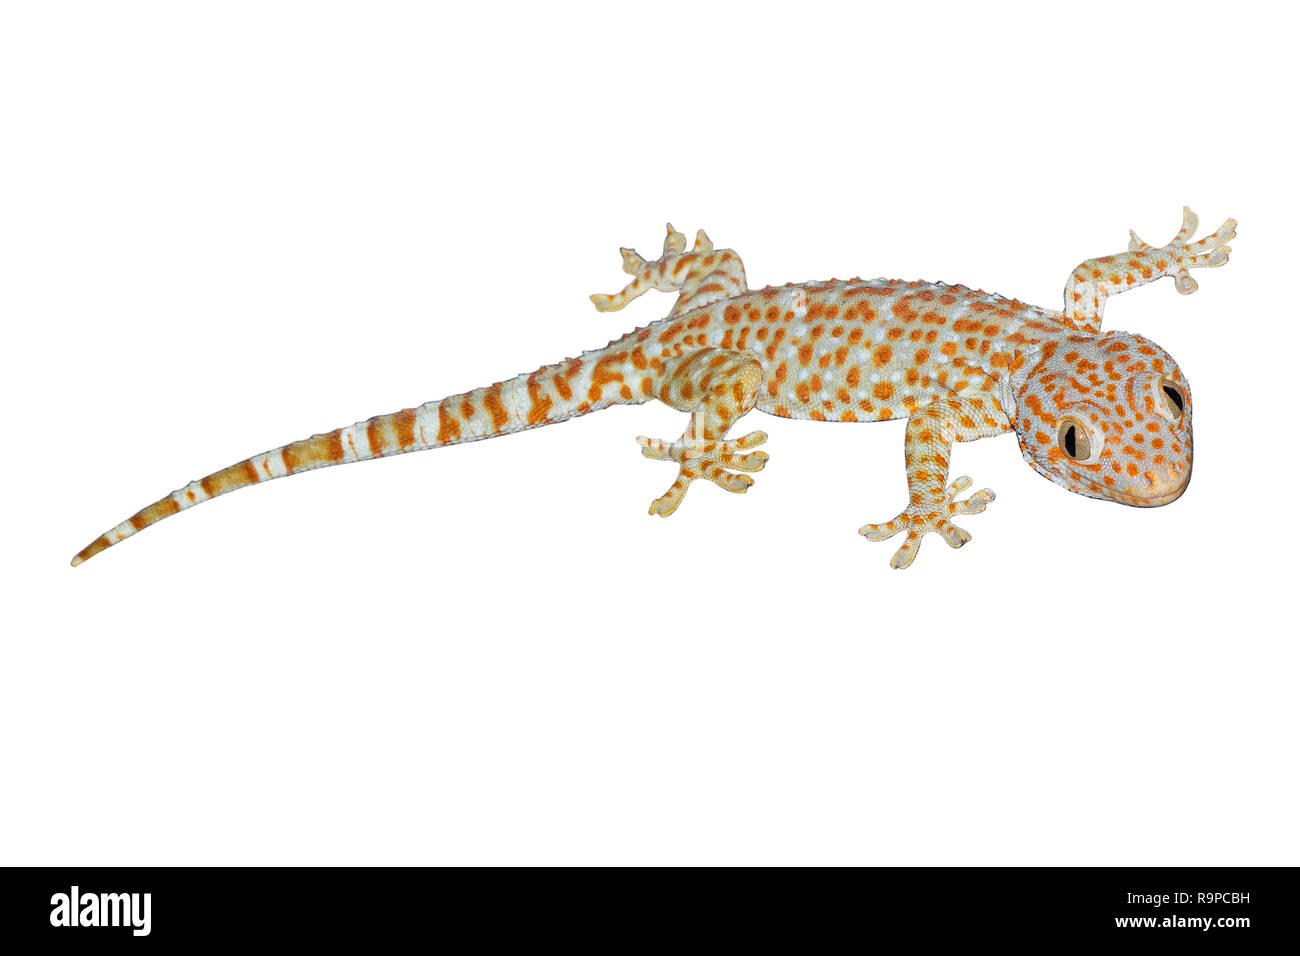 Gecko isolate on white background with clipping path. Stock Photo